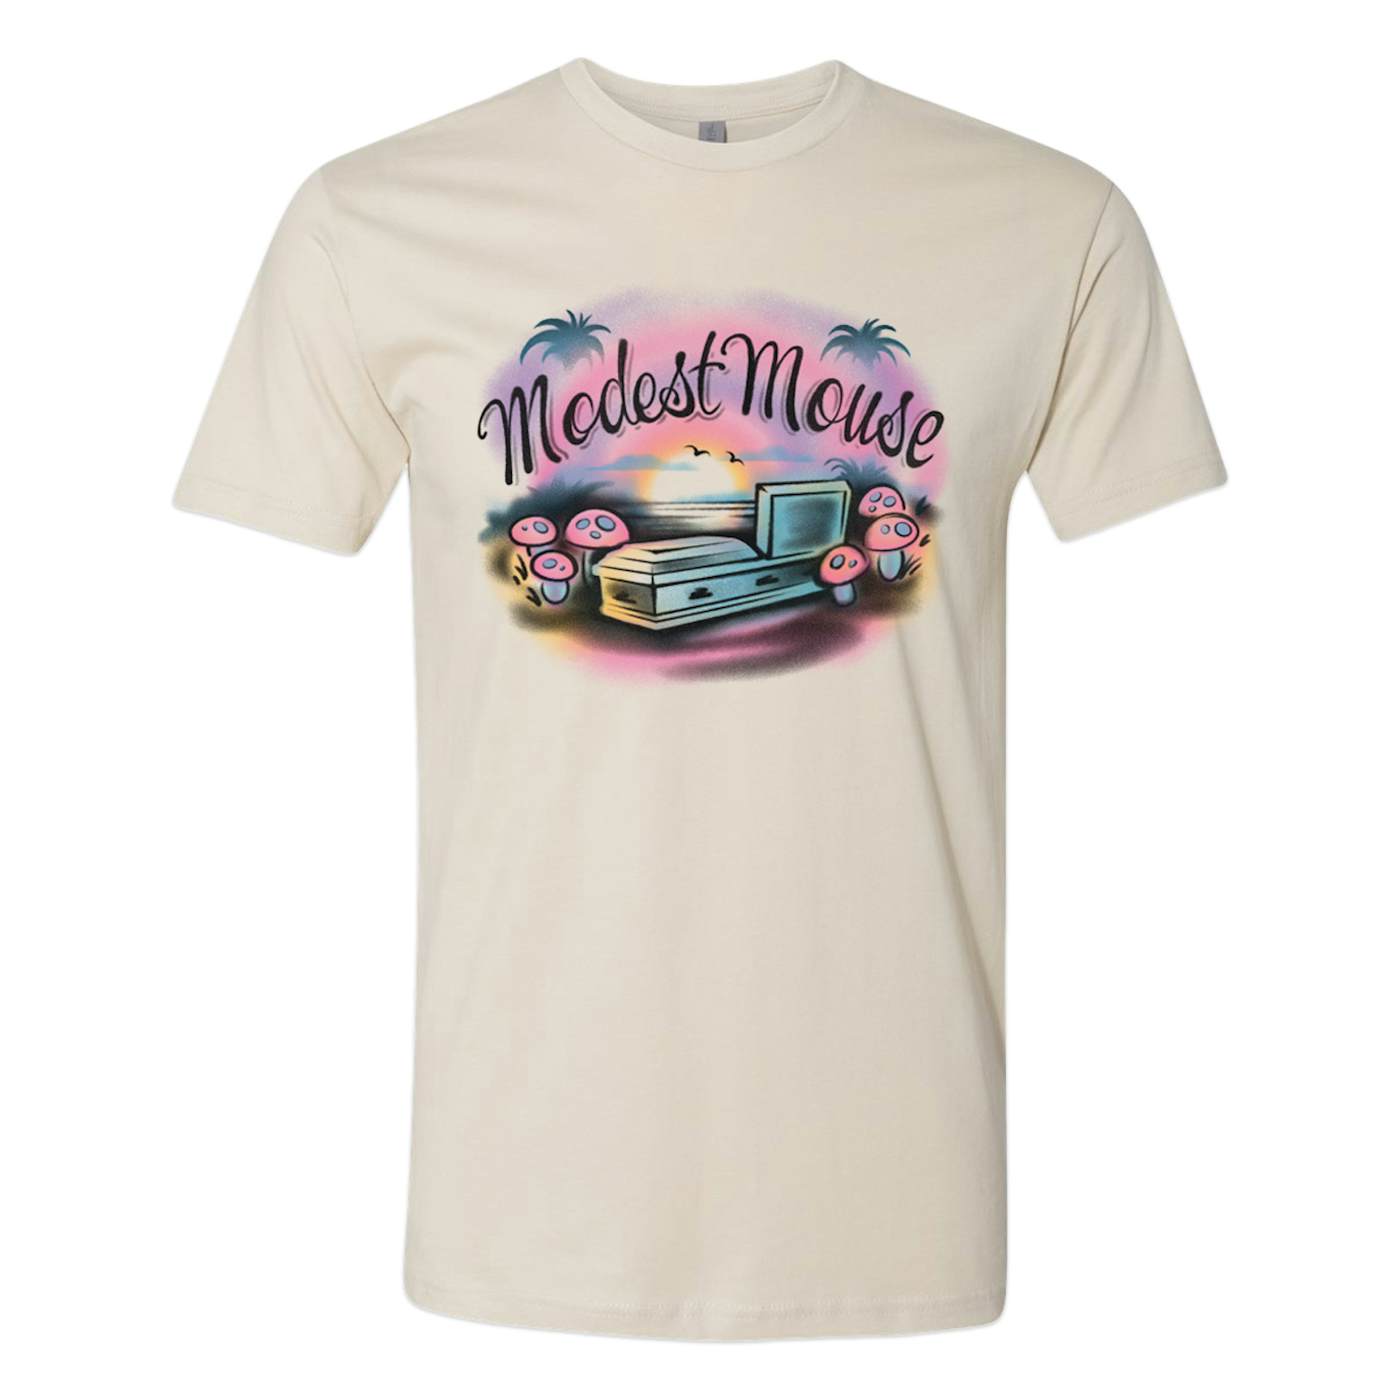 Modest Mouse Airbrush Sunset Tee